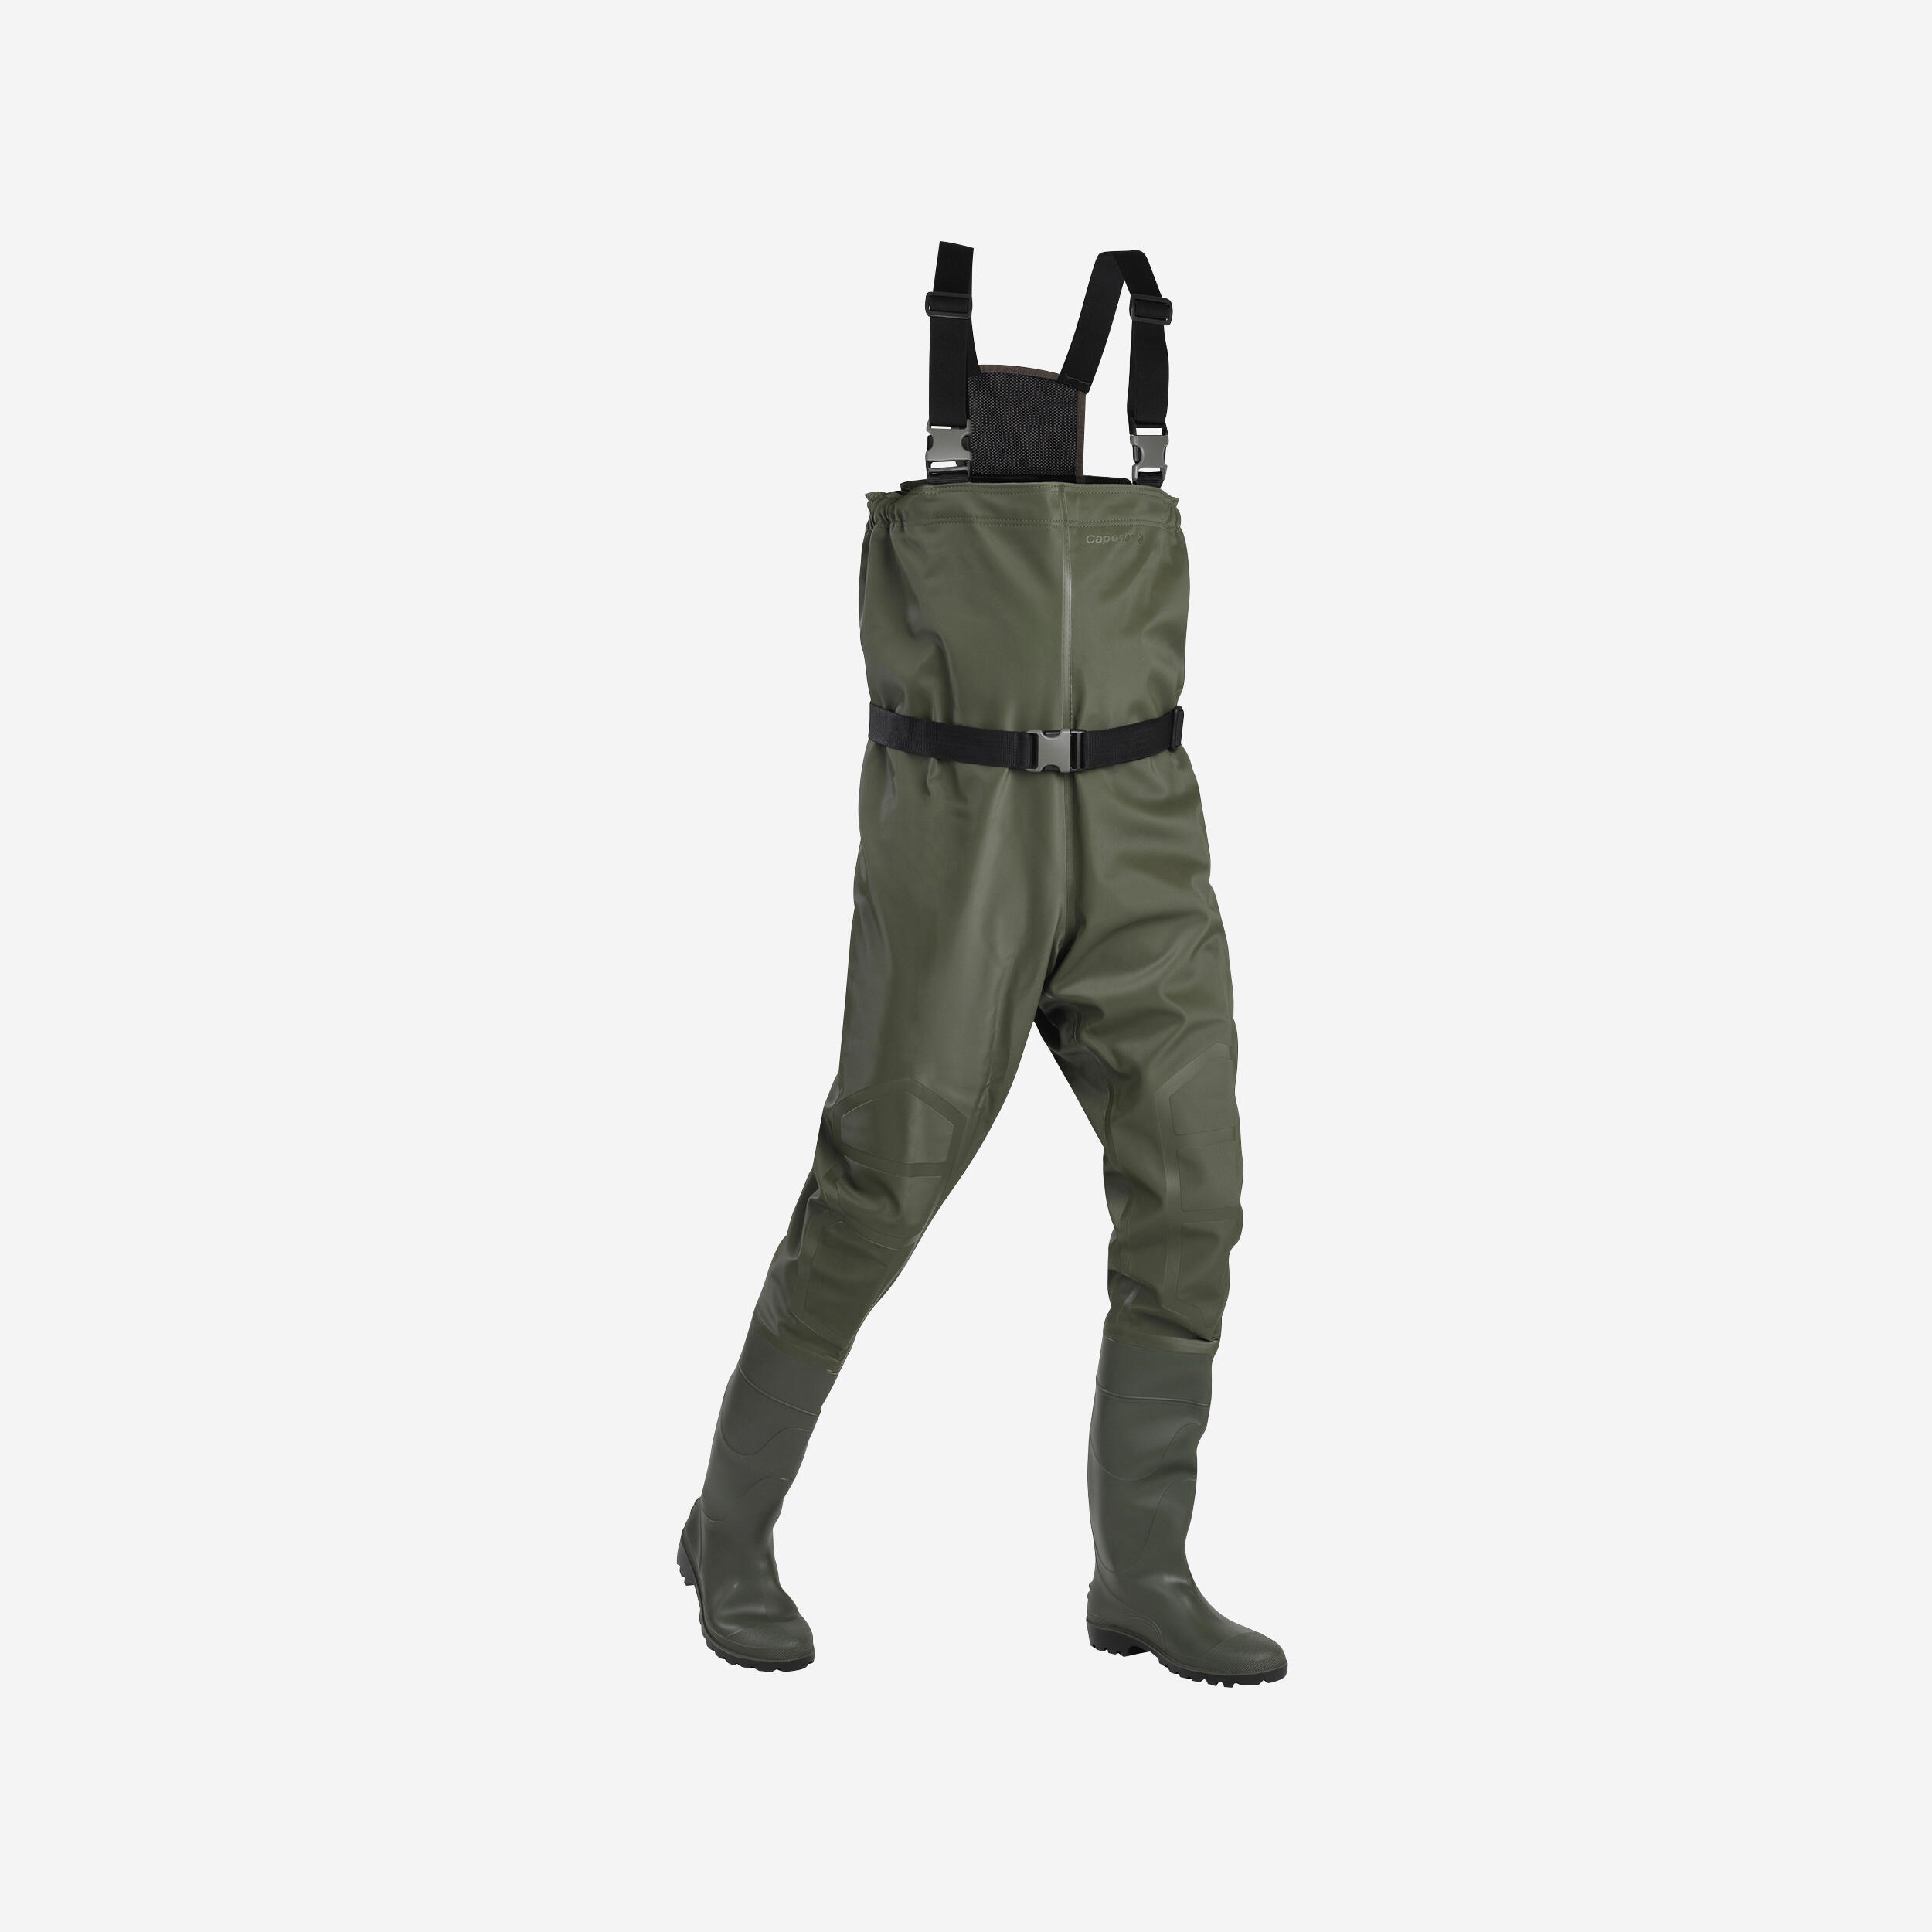 BEST Fishing Waders for Kids!?! 